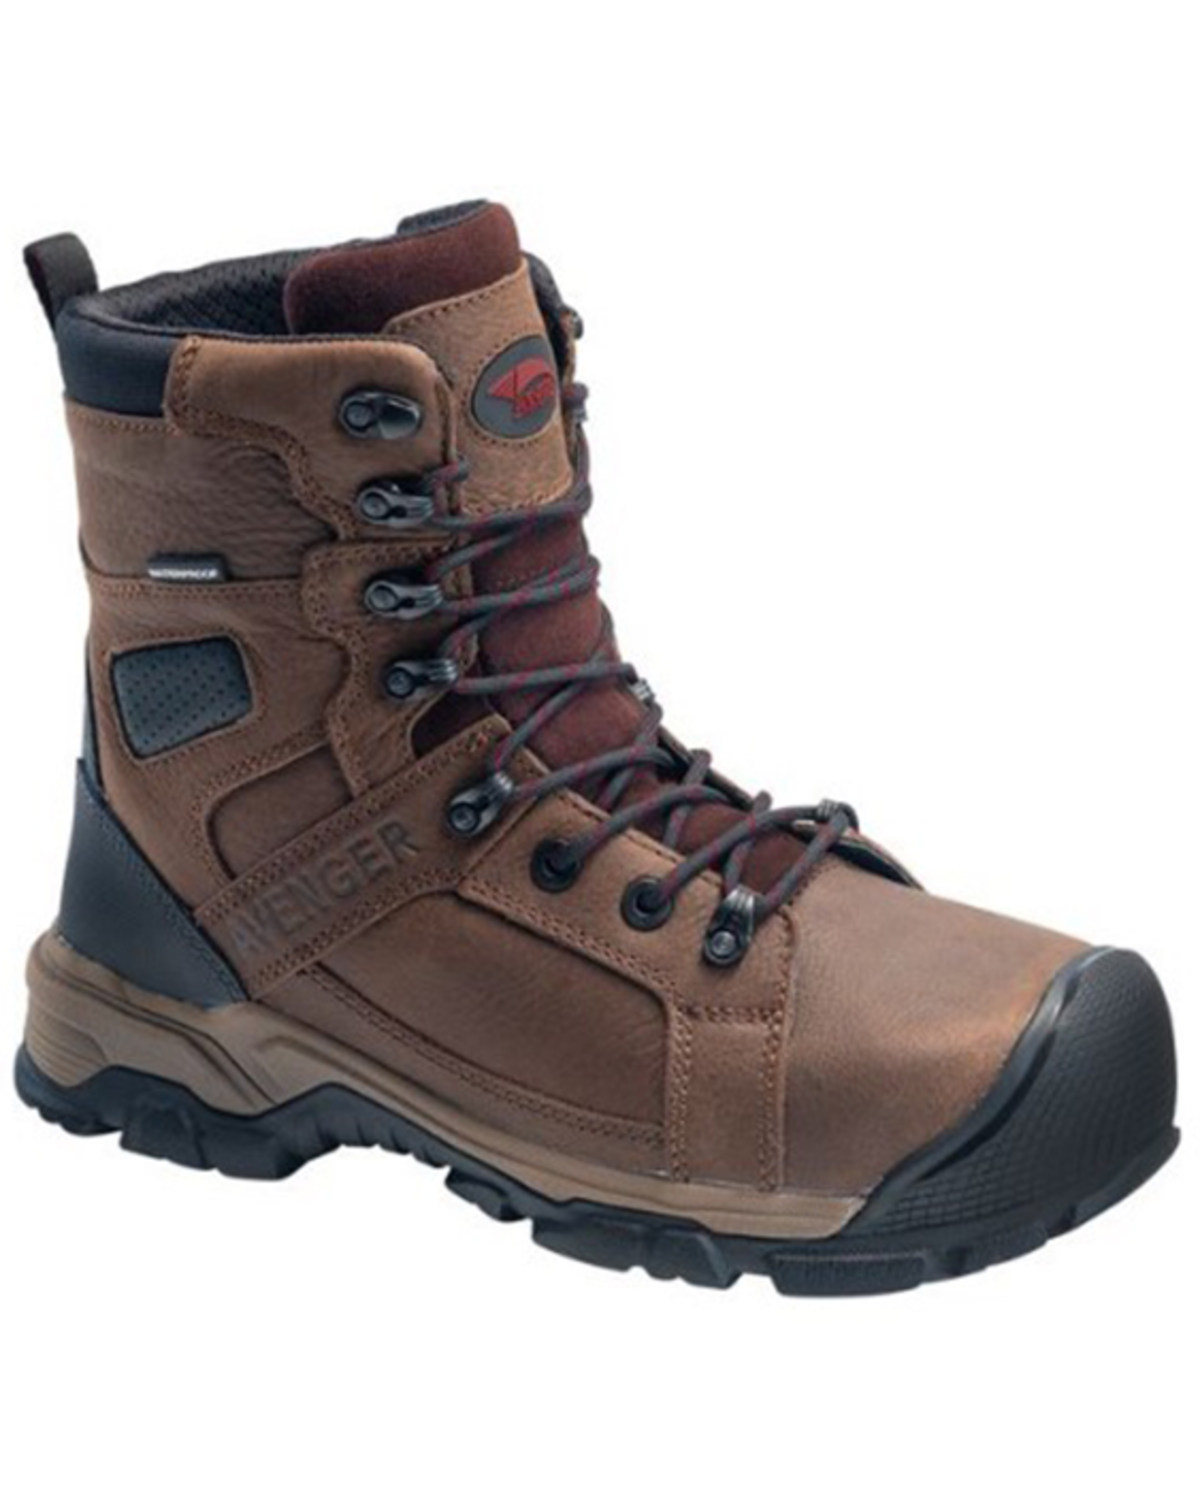 Avenger Men's Ripsaw 8" Waterproof Lace-Up Work Boot - Alloy Toe